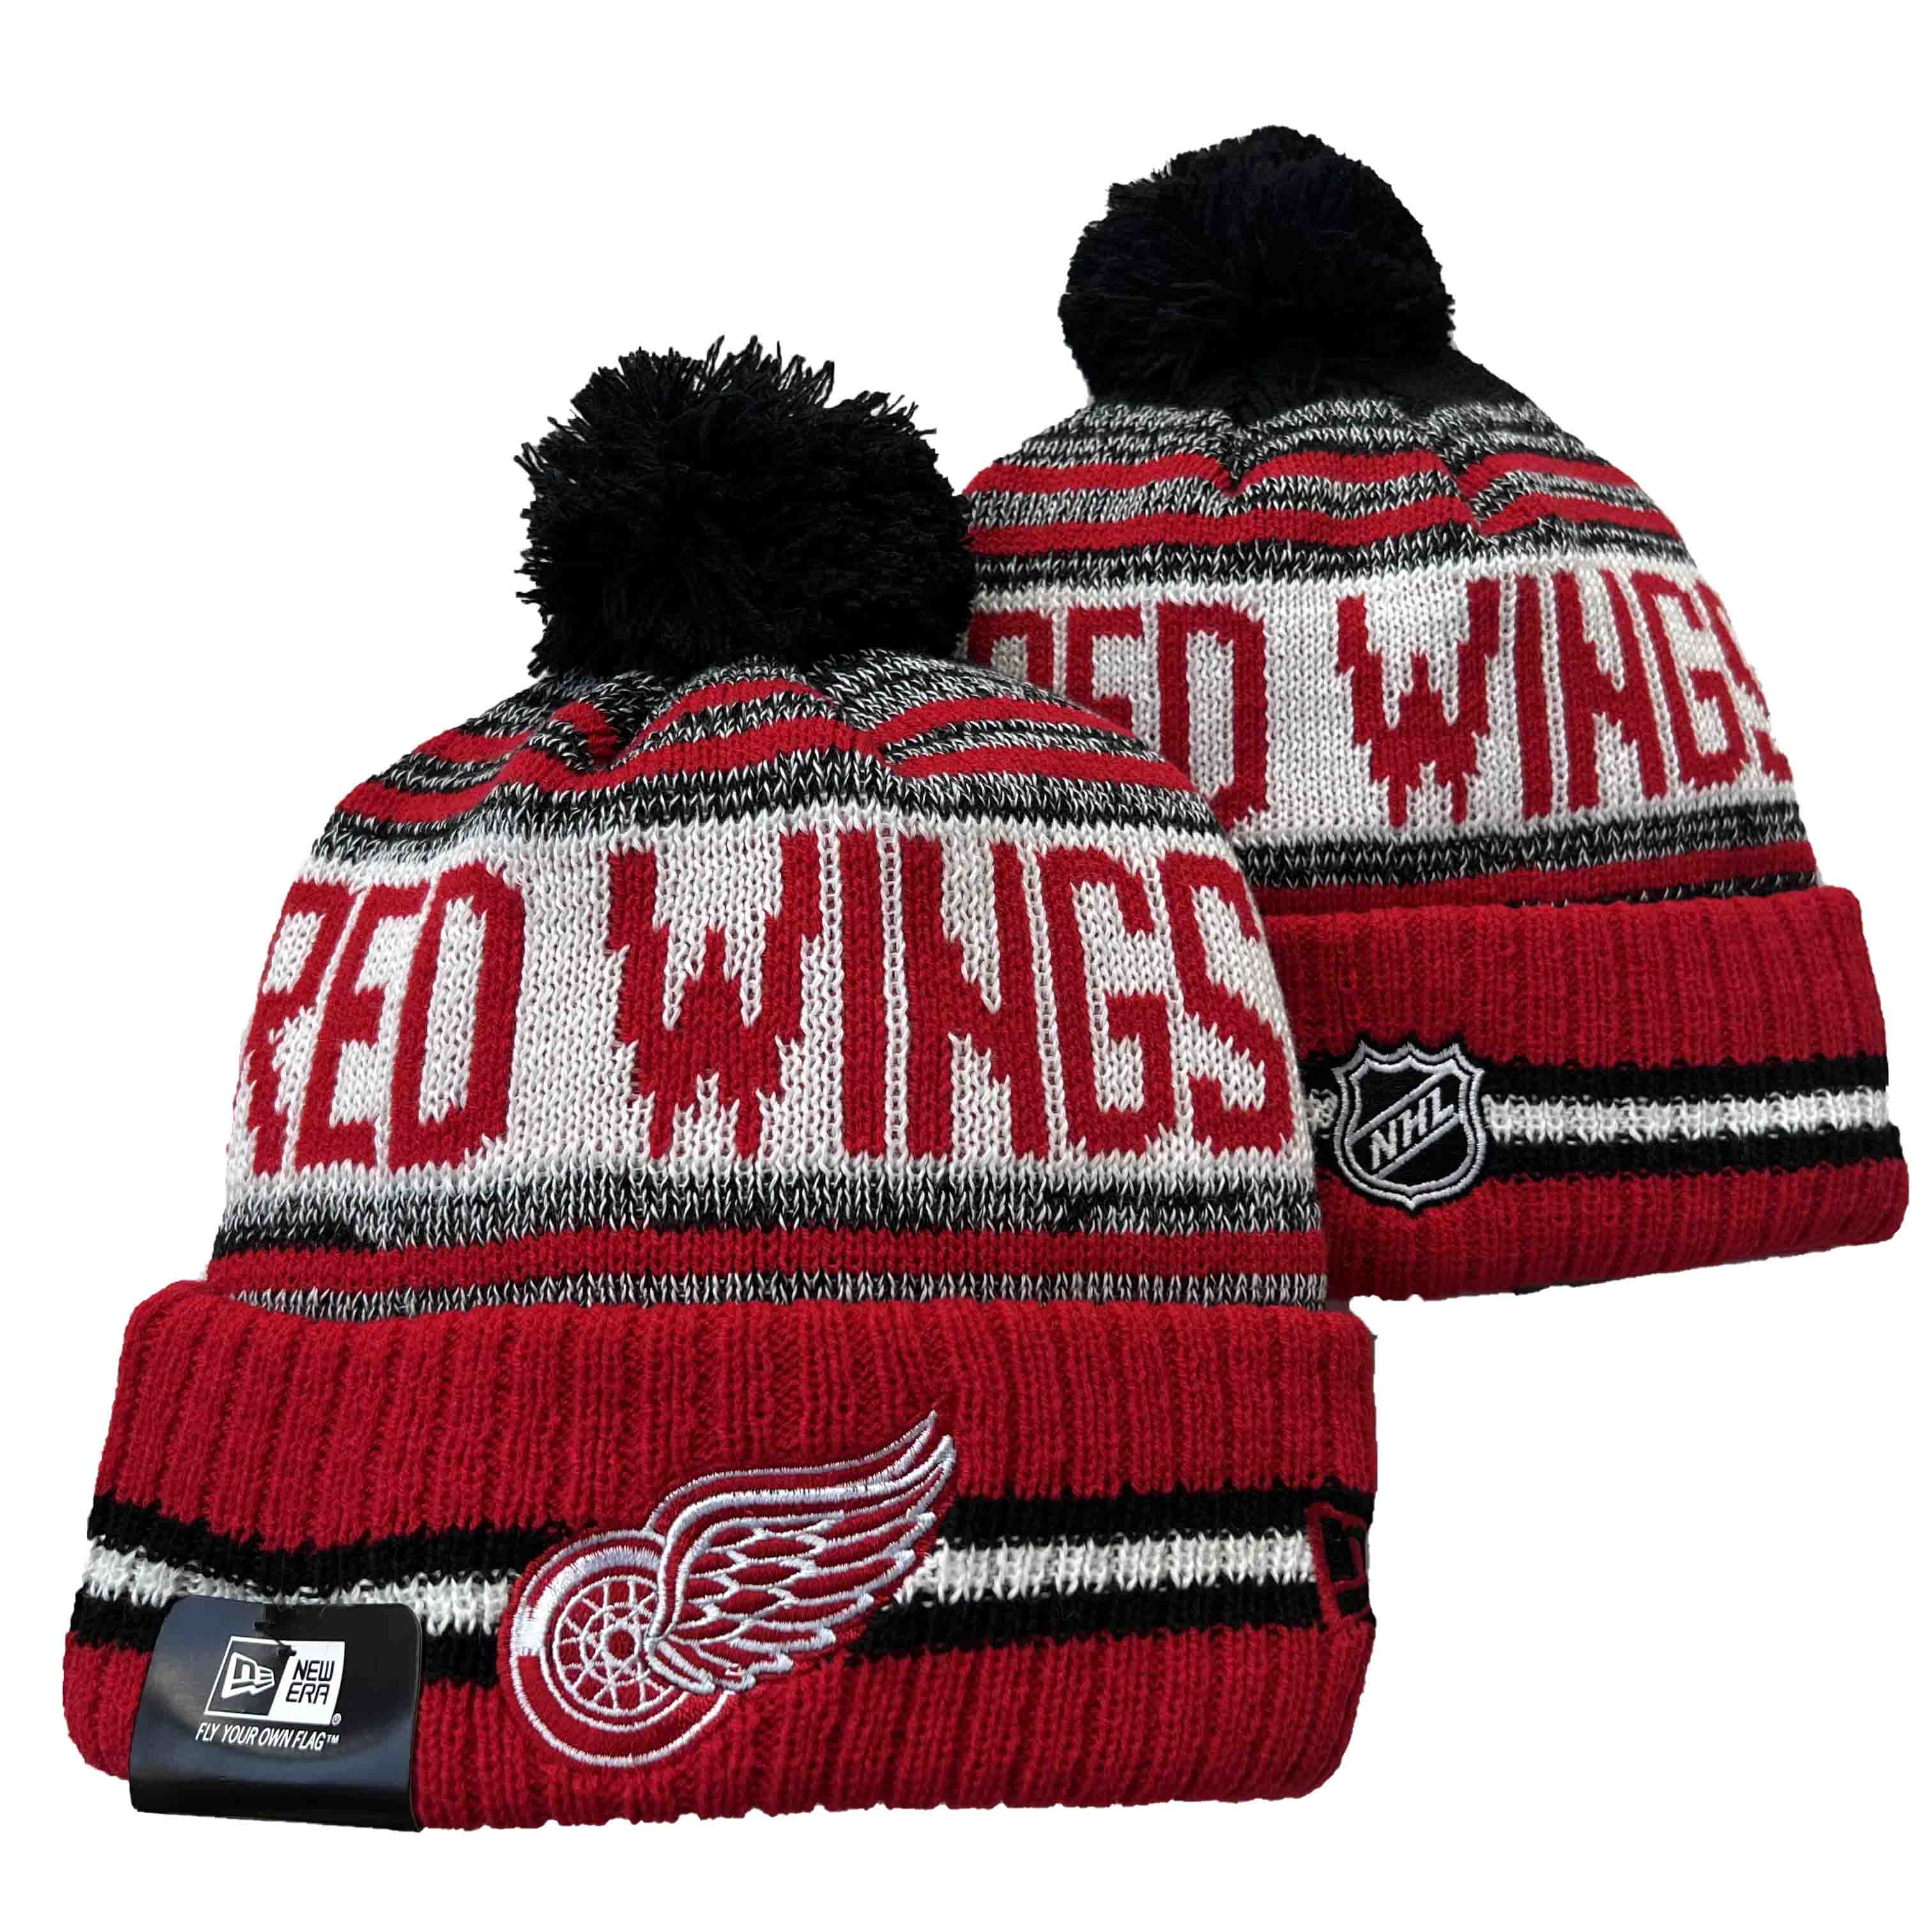 NHL Detroit Red Wings Beanies Knit Hats-YD1573